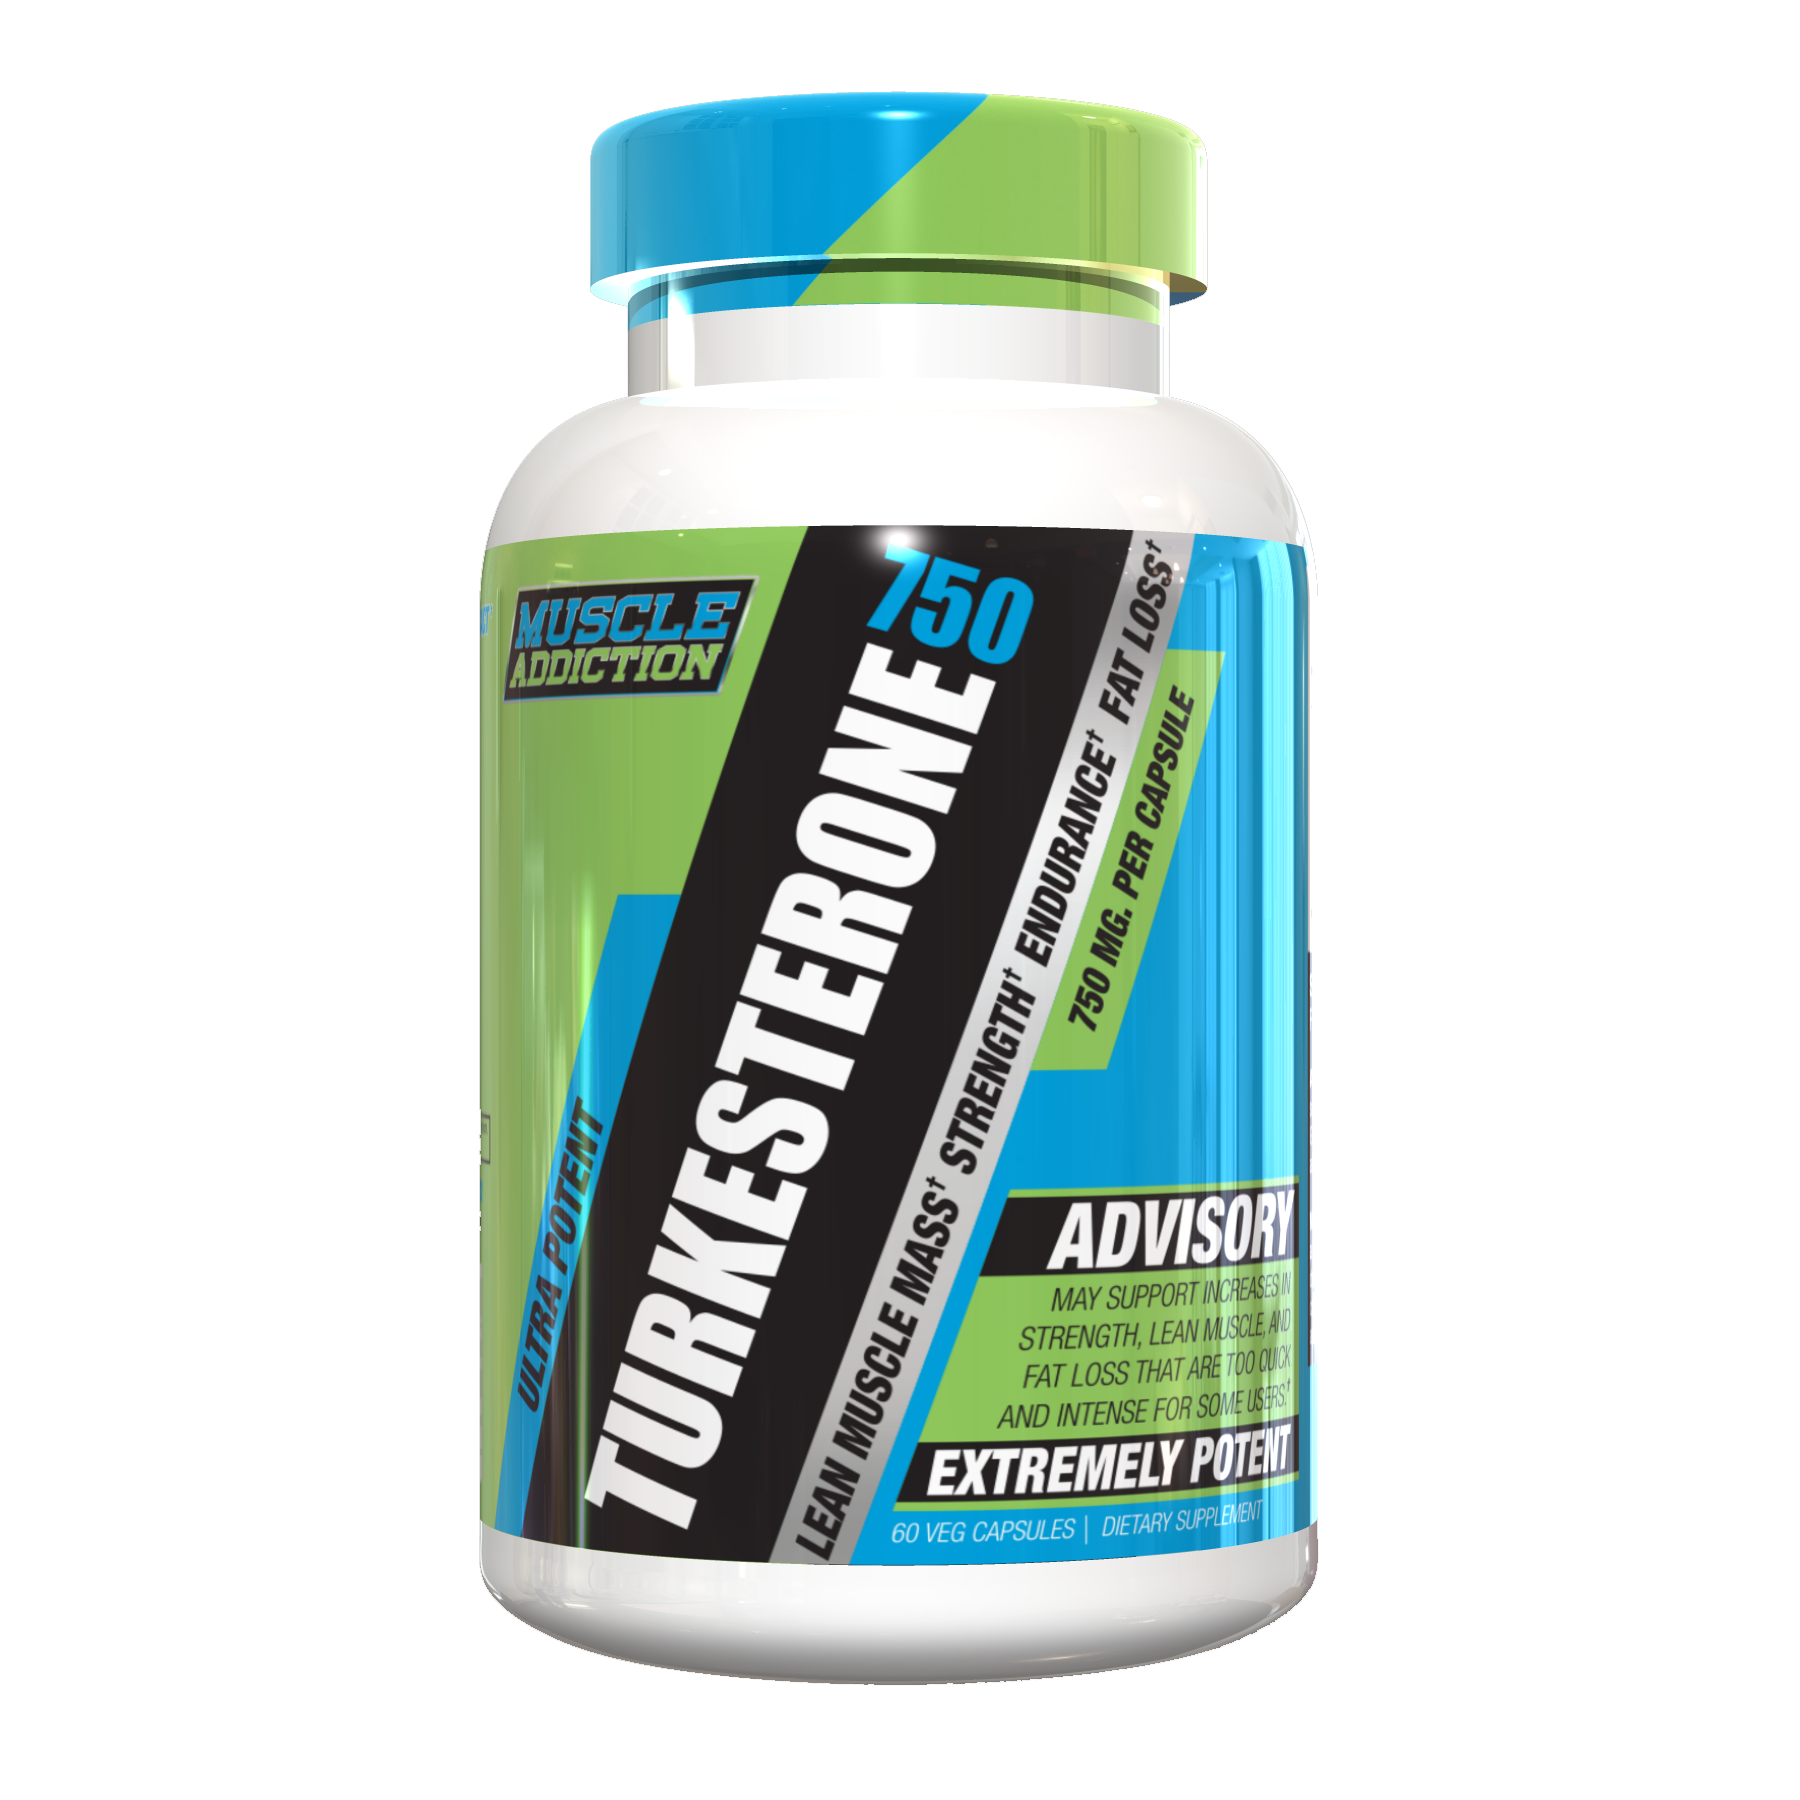 Muscle Addiction Turkesterone 750 - A1 Supplements Store